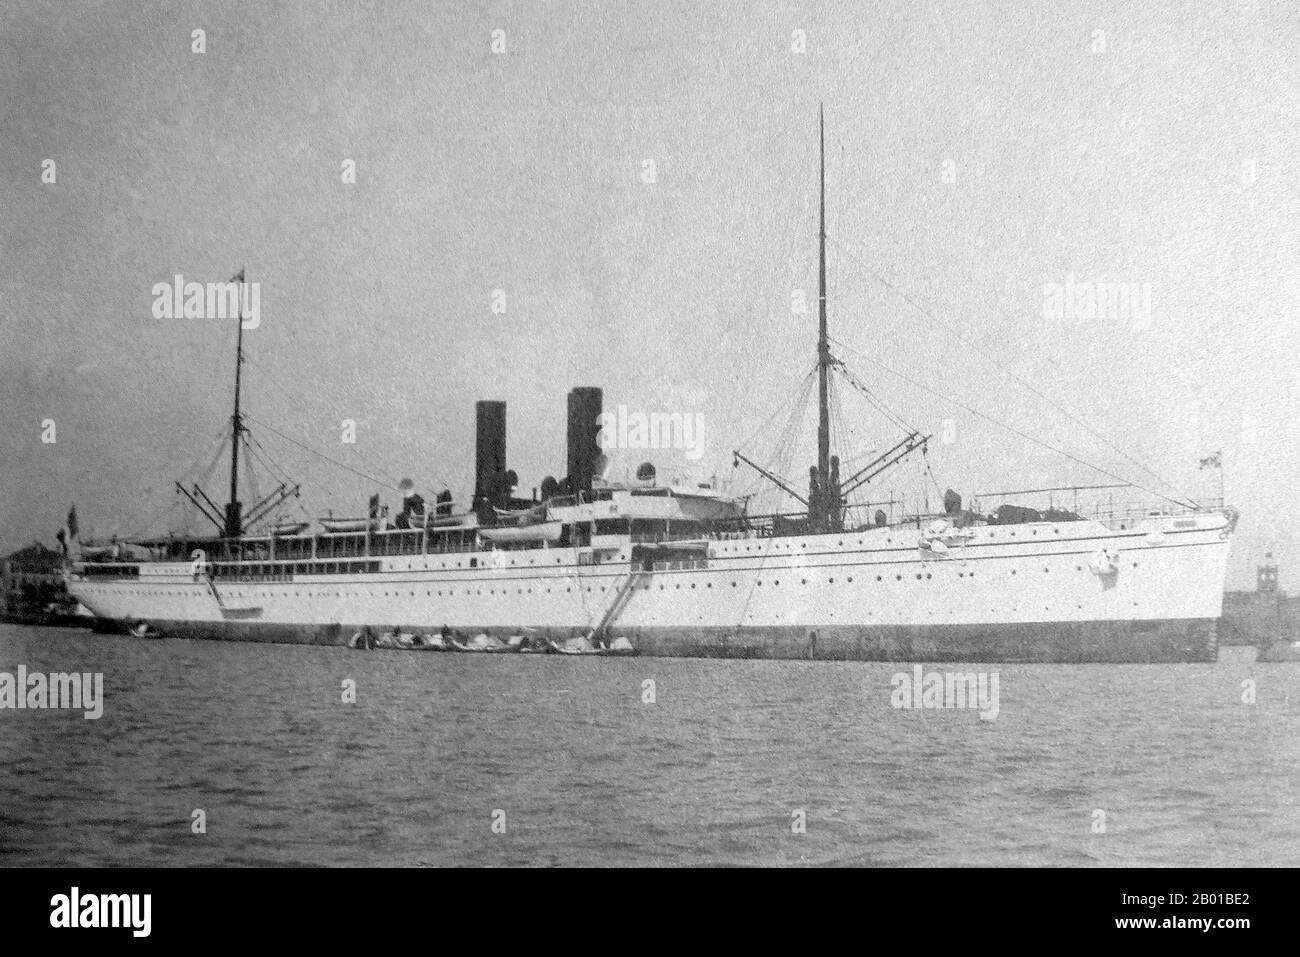 China: The Messageries Maritimes liner 'Tonkin' at anchor in Shanghai, c. 1910.  The Messageries Maritimes is an old French maritime company. It was originally created in 1851 as Messageries Nationales, later called Messageries Impériales, and in 1871, Compagnie des Messageries Maritimes.  From 1871 to 1914, the Compagnie des Messageries Maritimes experienced its Golden Age. This was the period of the colonial expansion and of the French interventionism in the Middle and Far East. In the Far East Saigon became the regional headquarters of the company. Stock Photo